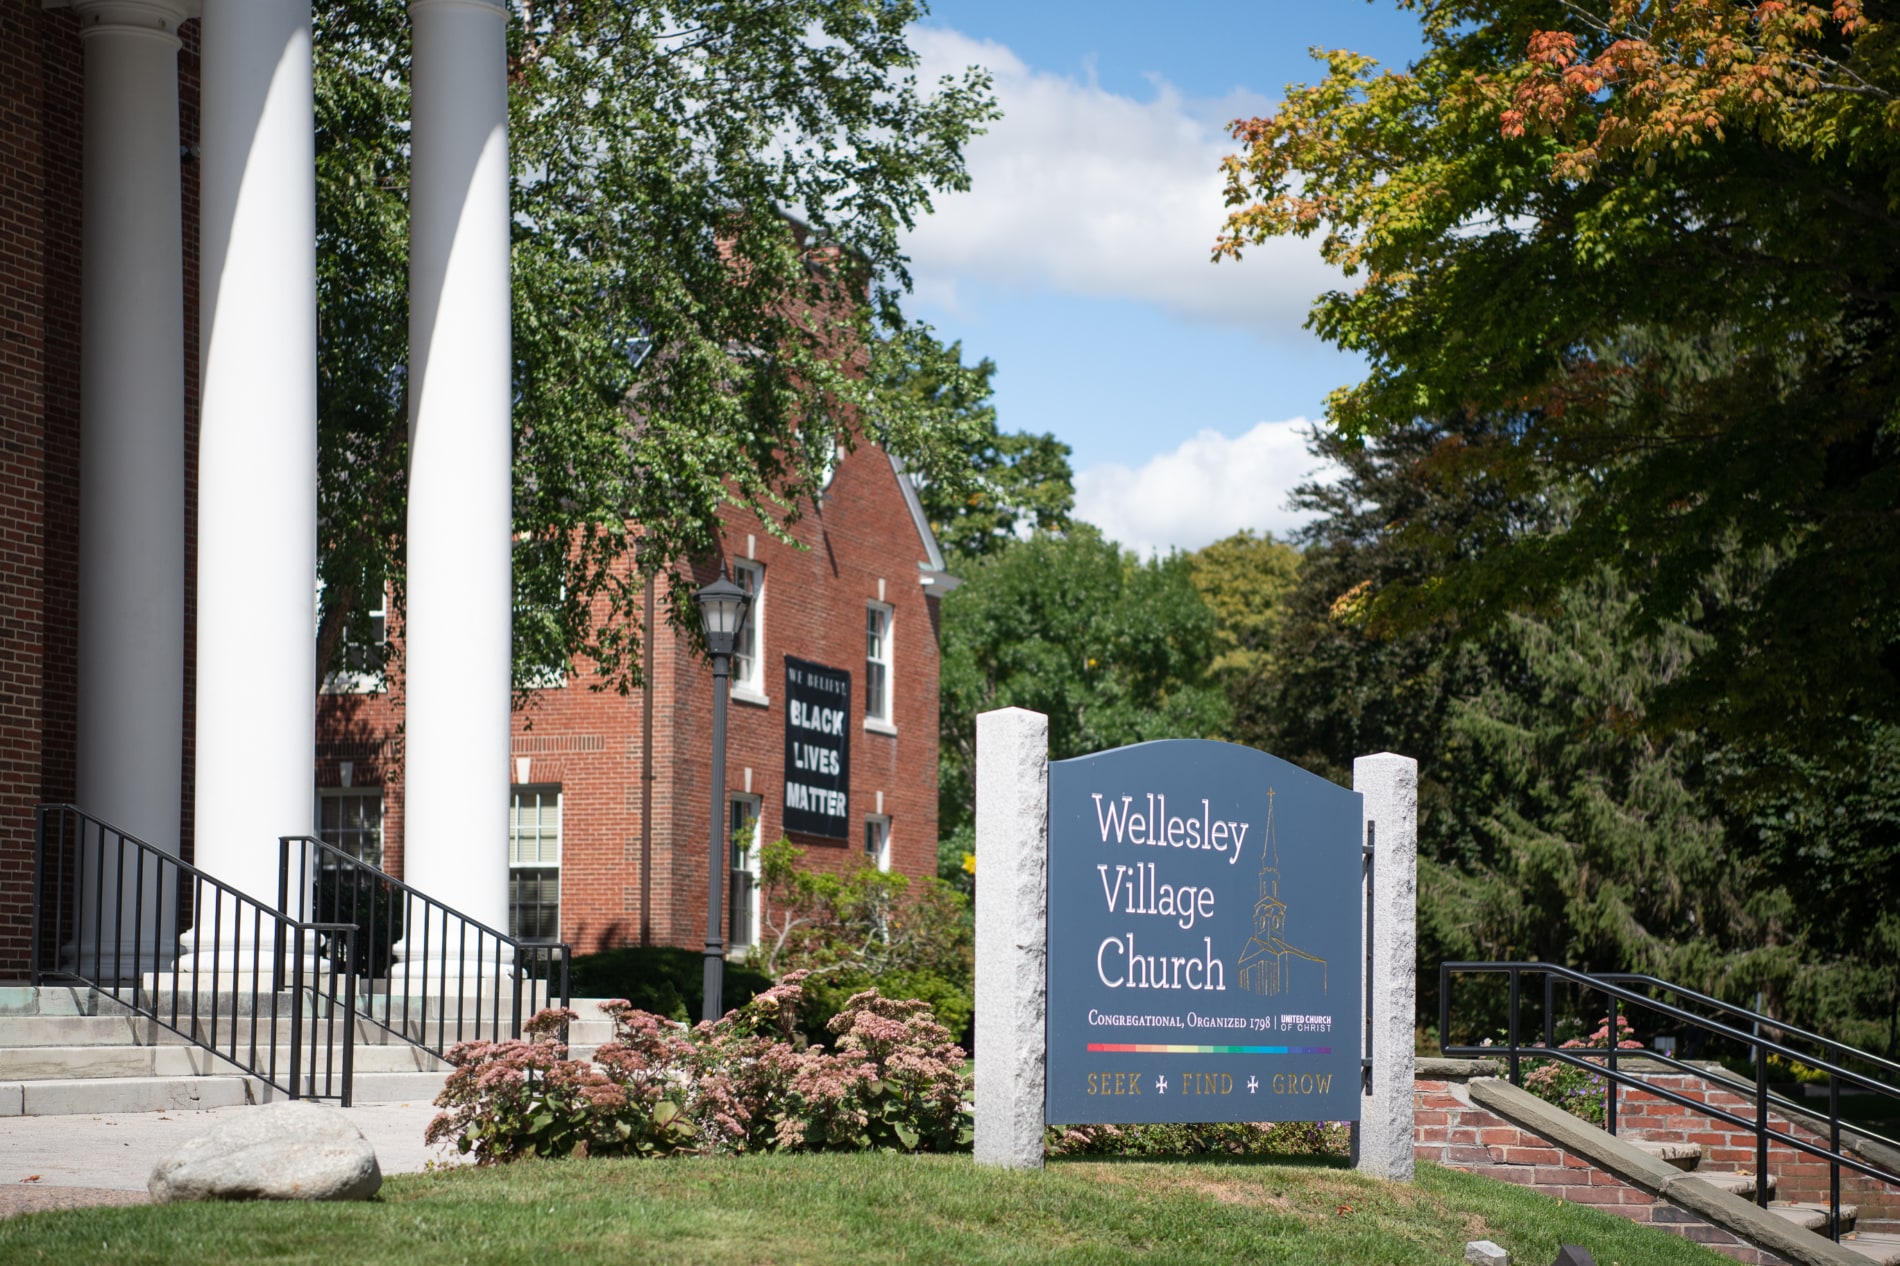 The exterior sign of the Wellesley Village Church with a Black Lives Matters banner in the background